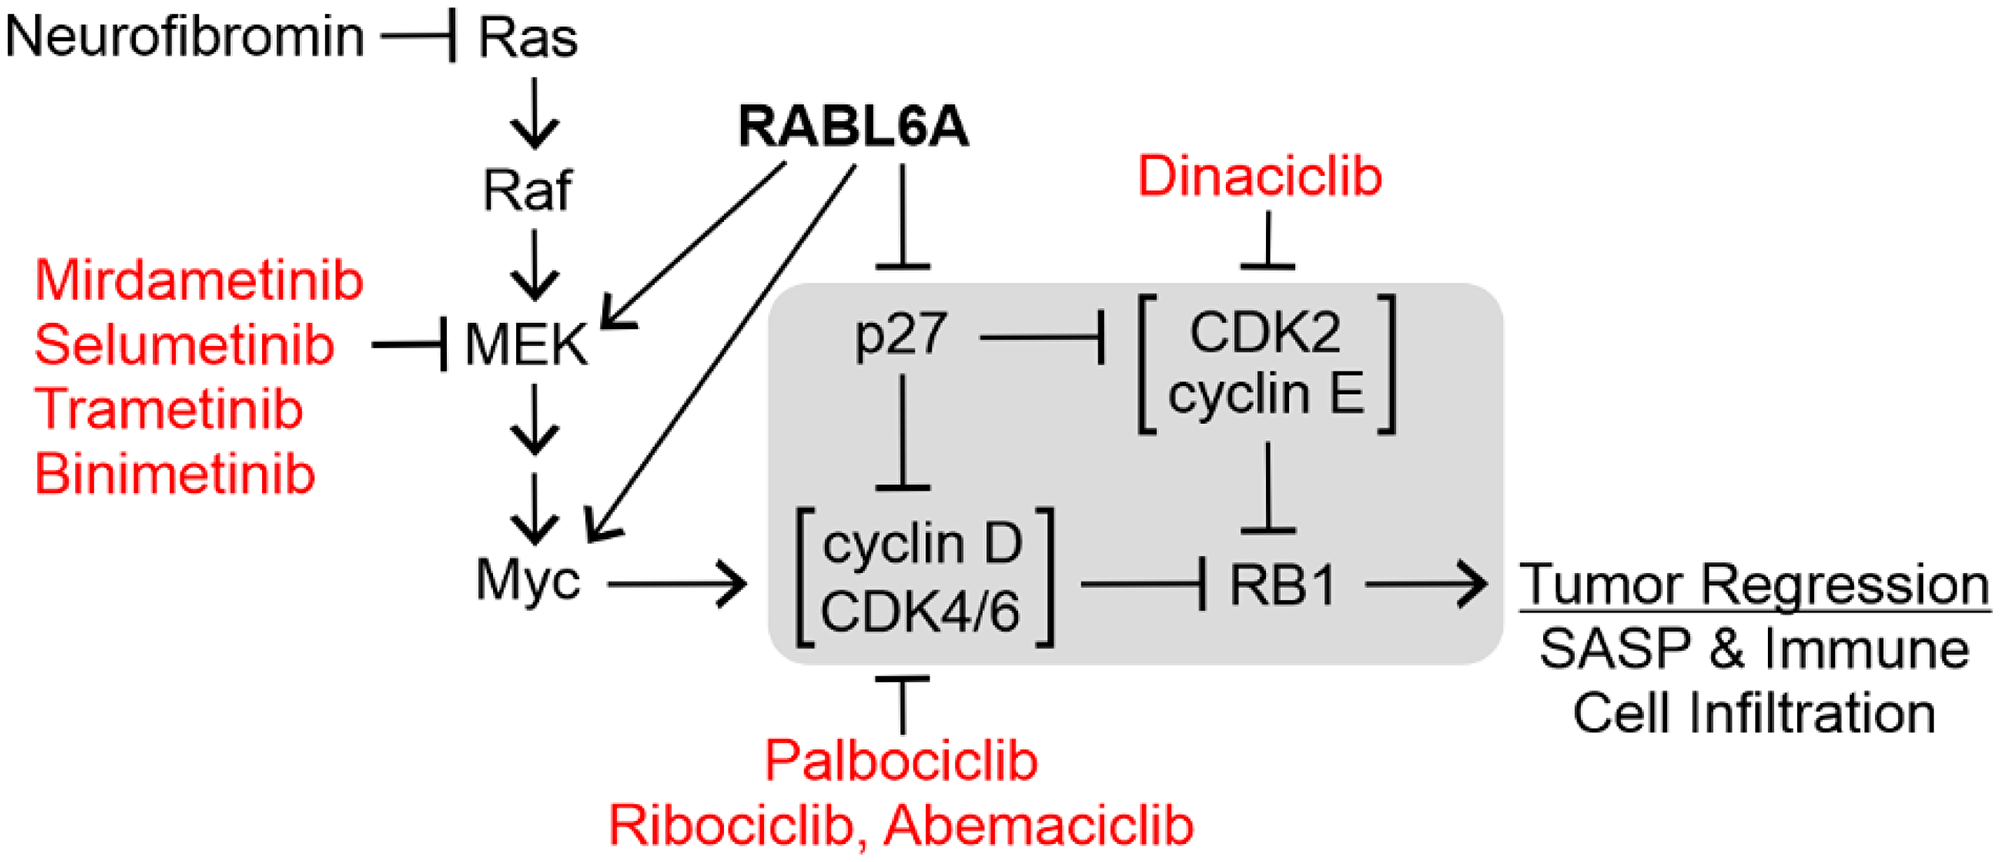 Pharmacologic targeting of the RABL6A-RB1 pathway in tumors.